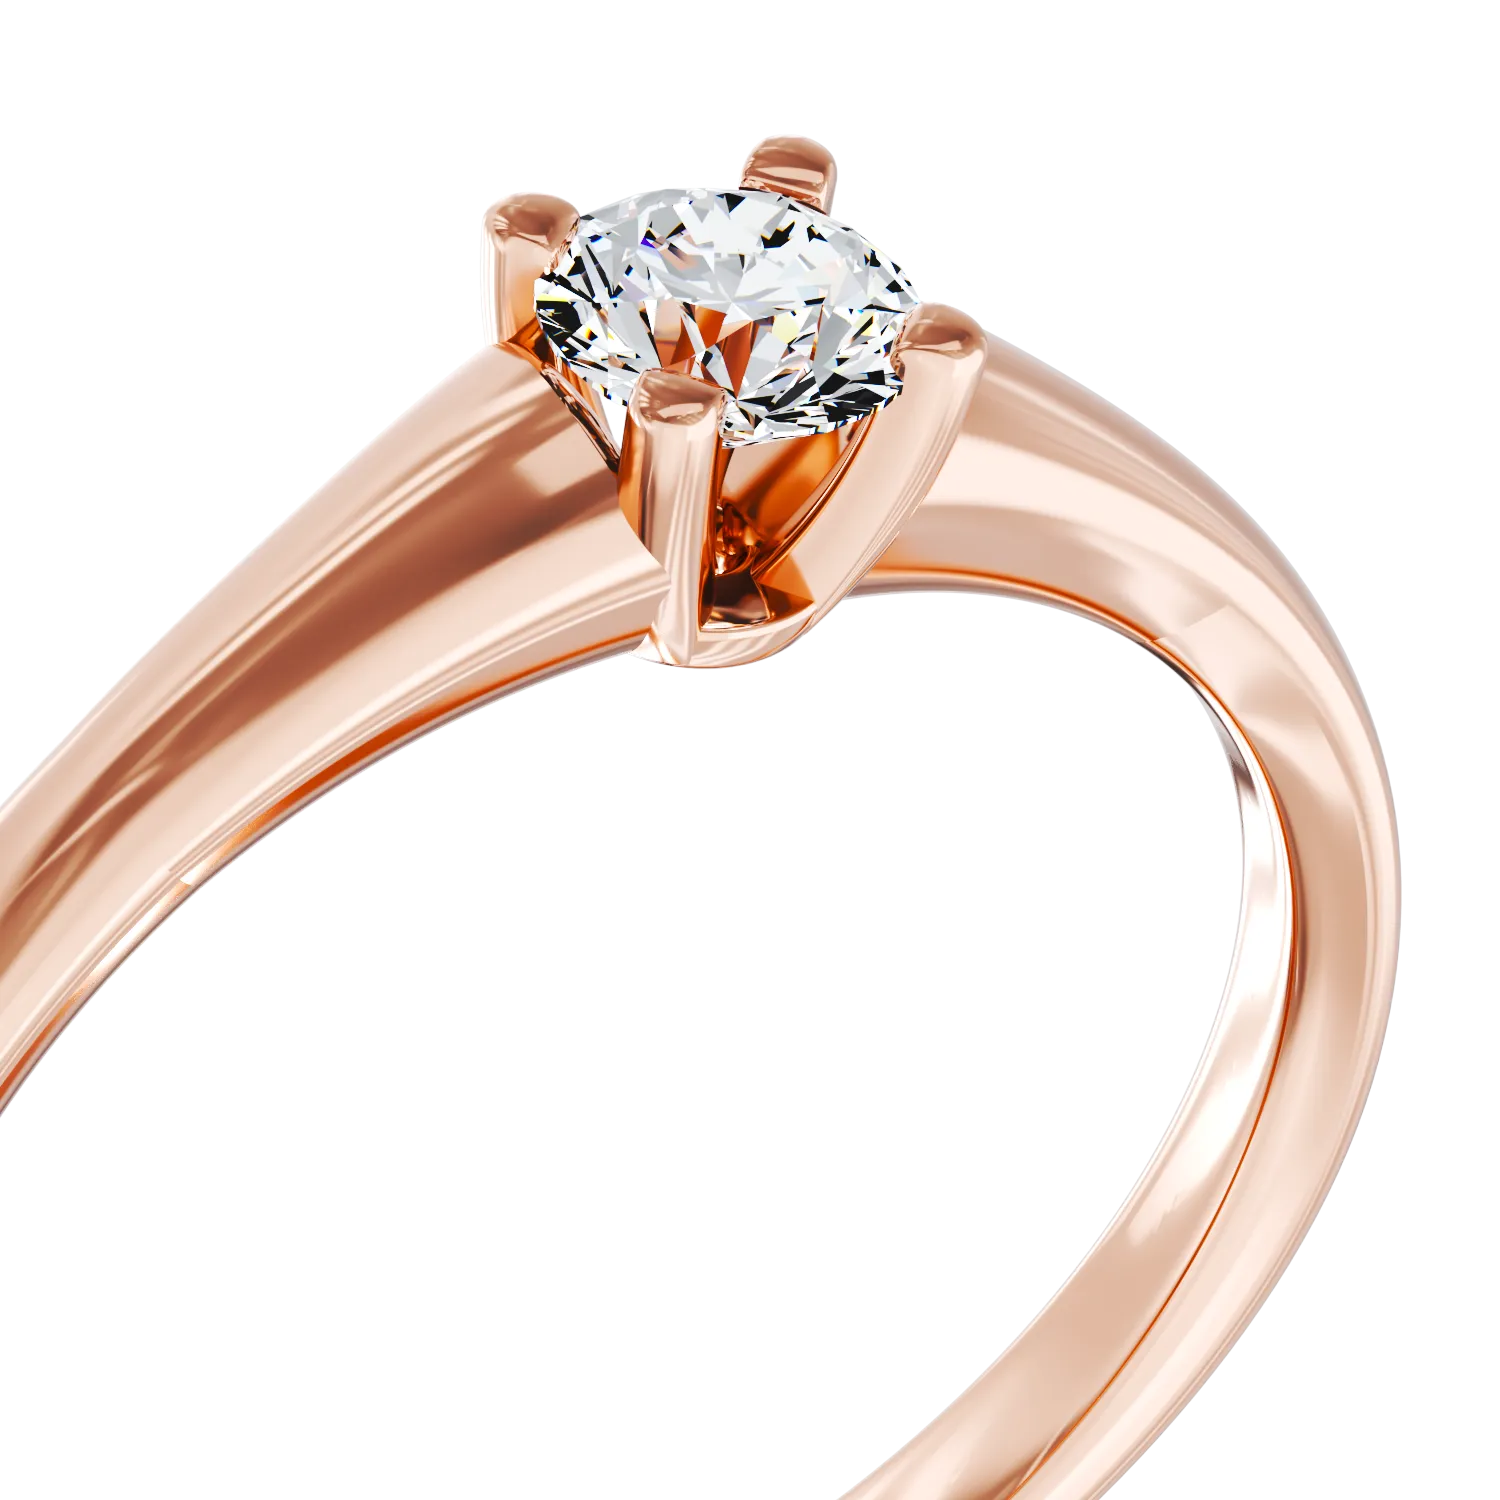 Rose gold engagement ring with 0.1ct solitaire diamond